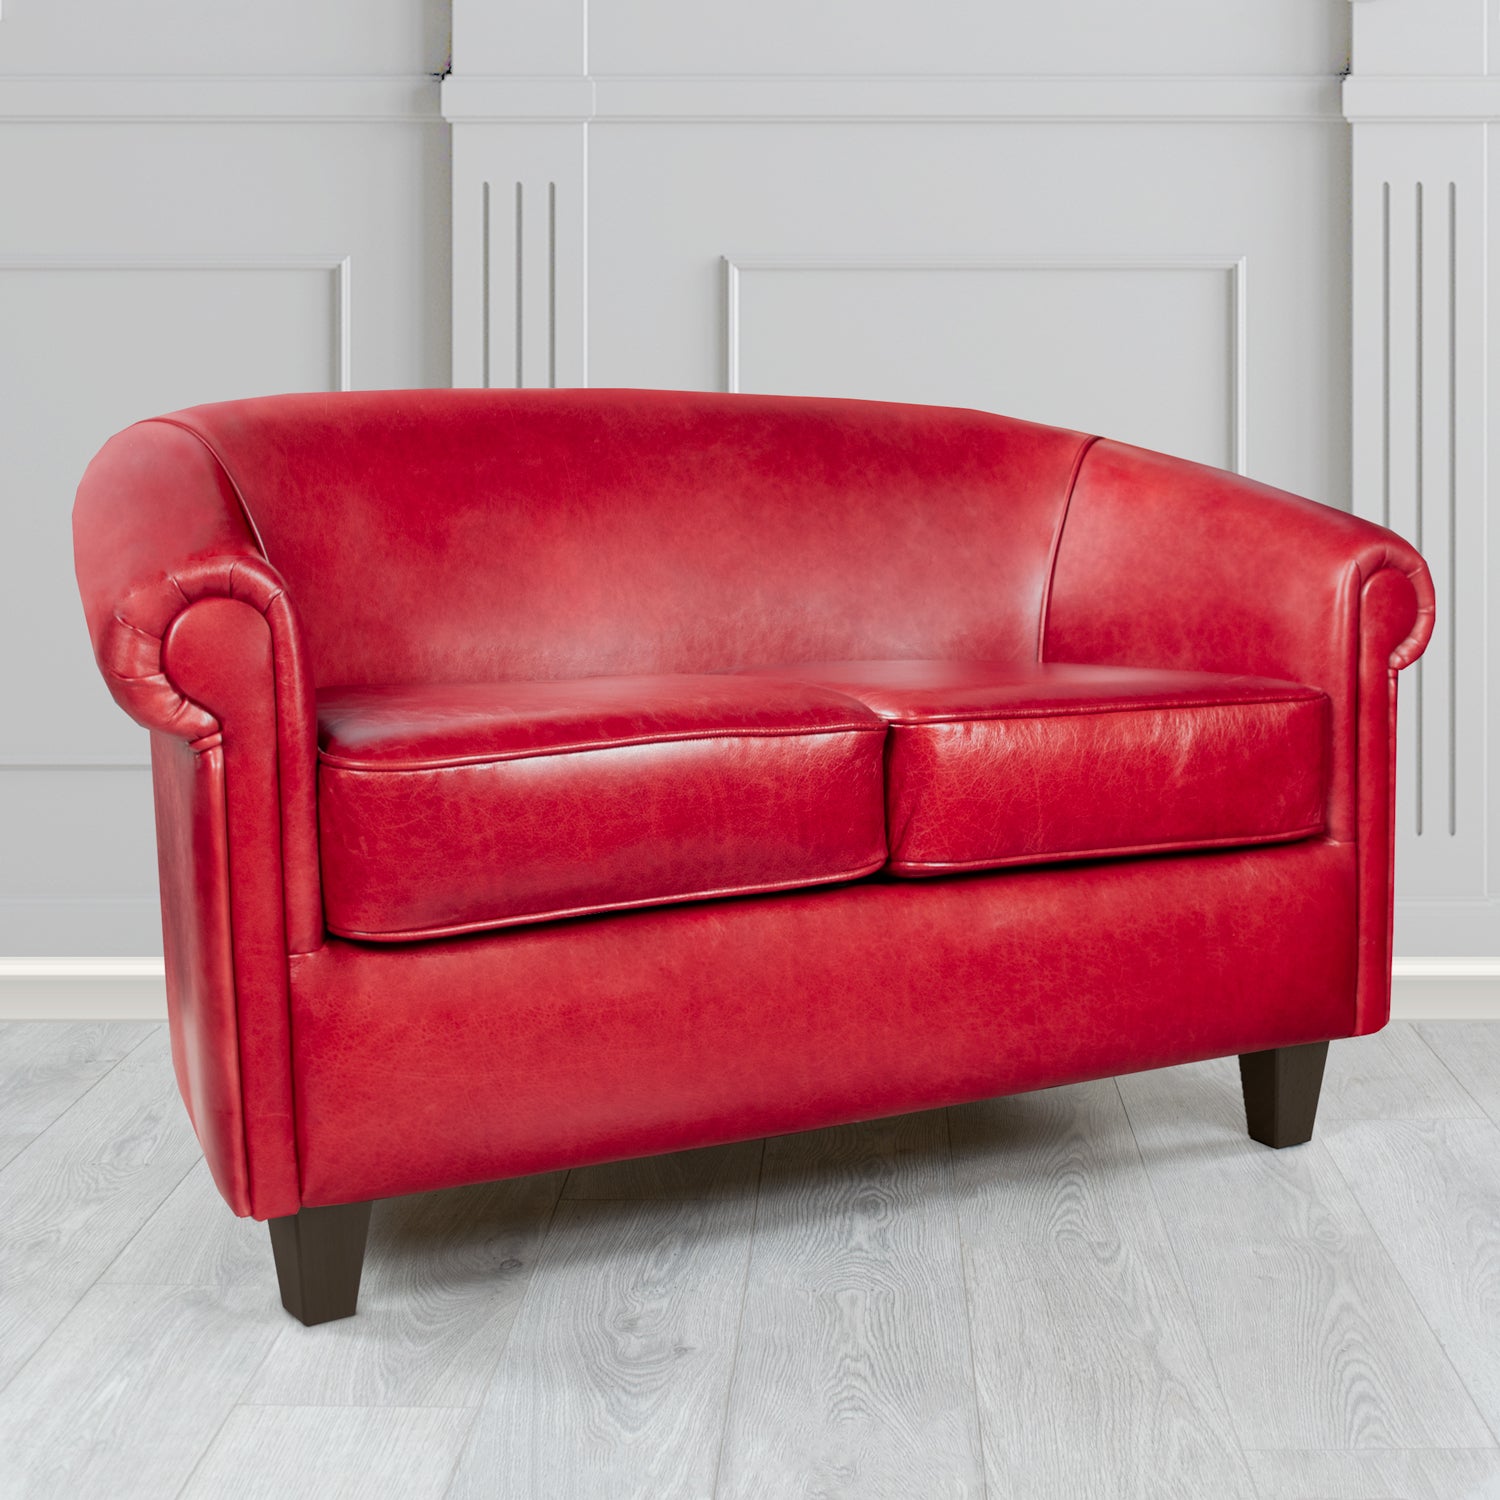 Siena 2 Seater Tub Sofa in Crib 5 Old English Gamay Genuine Leather - The Tub Chair Shop